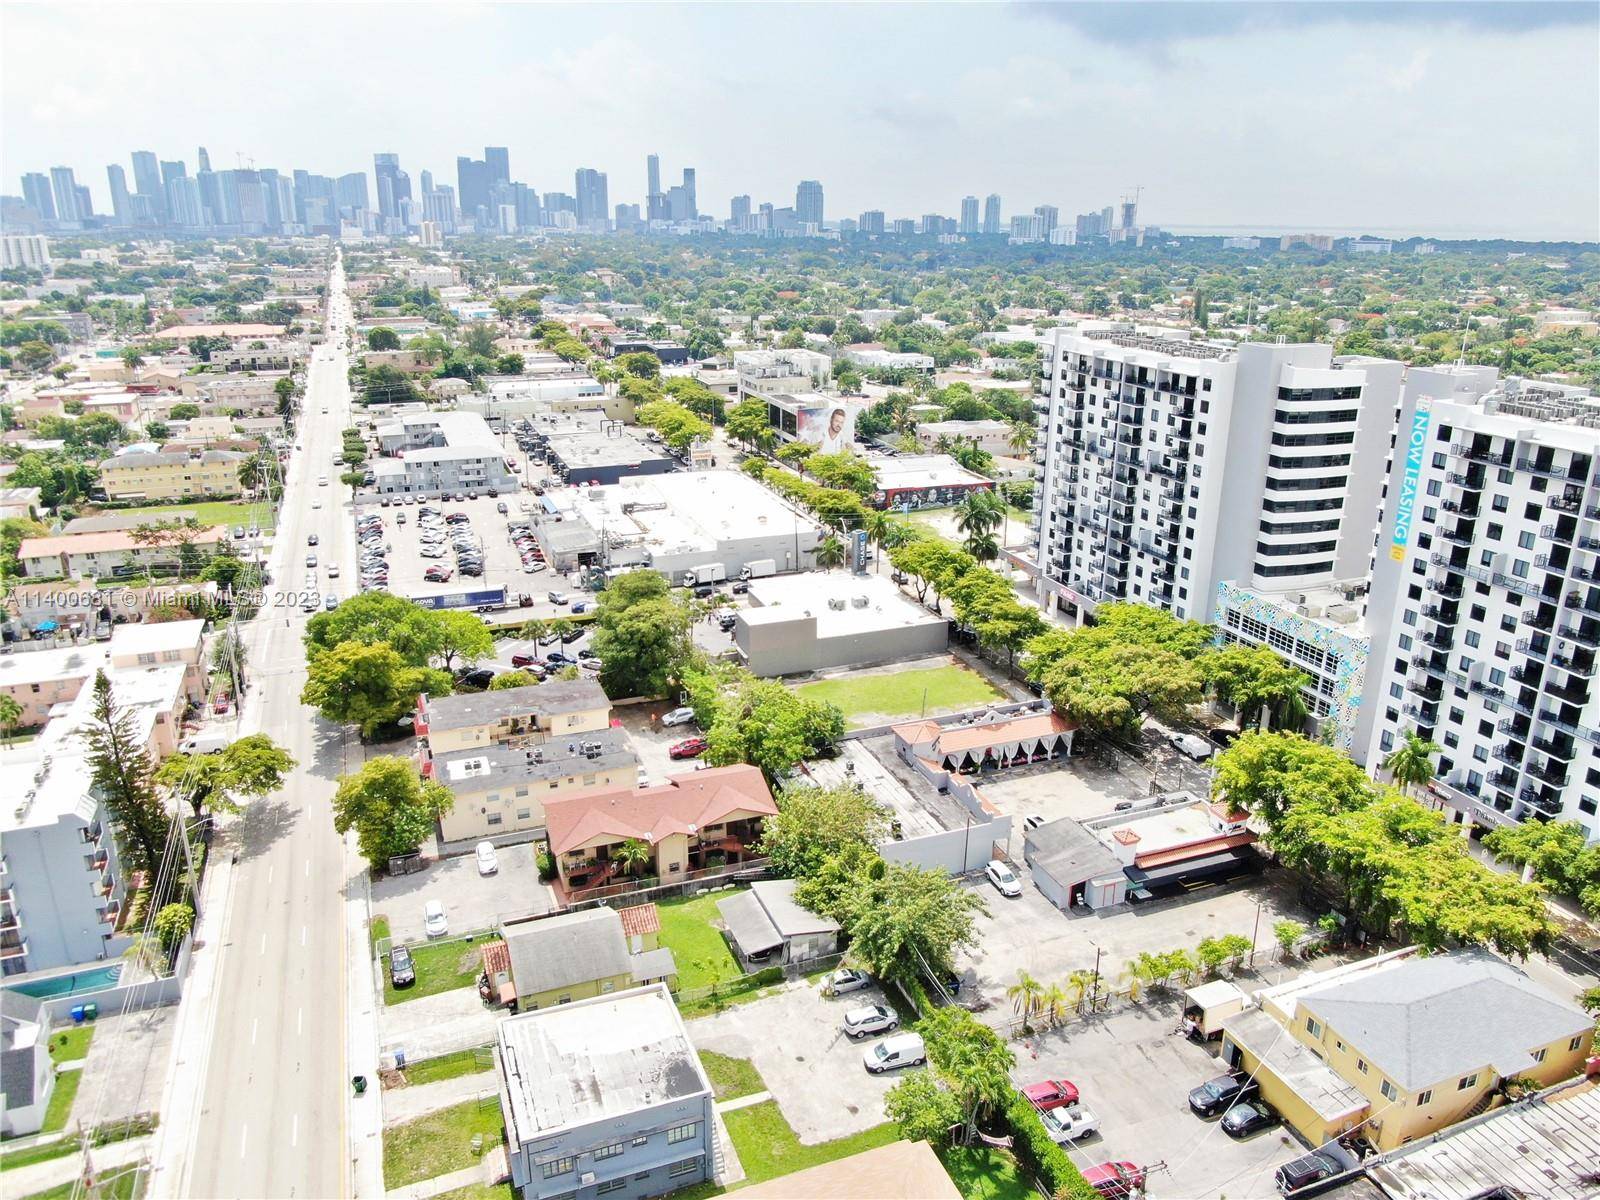 Unique Calle Ocho Covered Land Play.